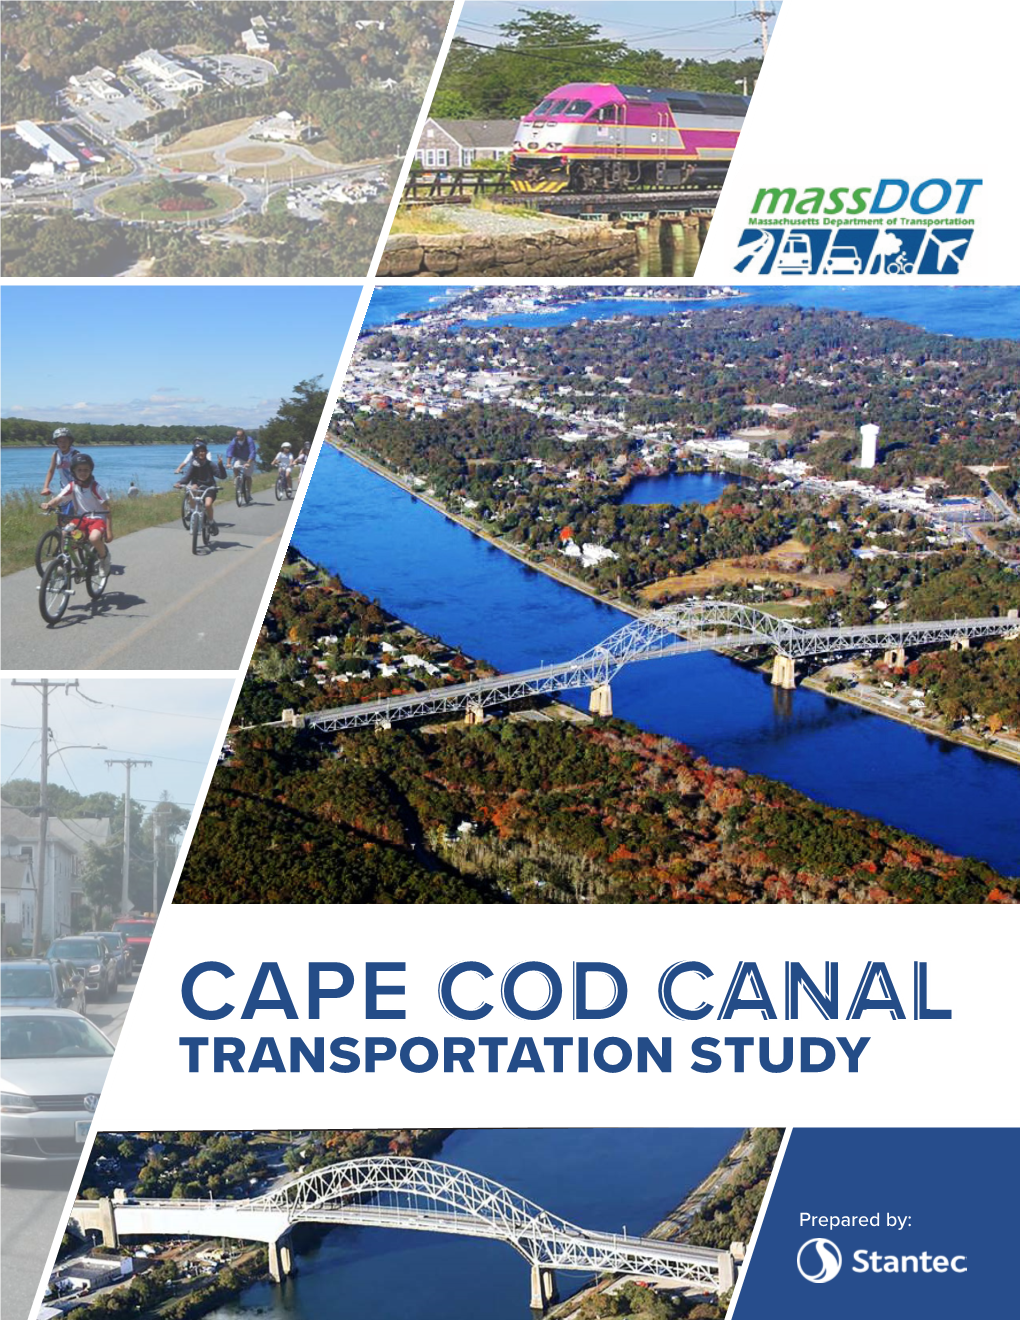 Cape Cod Transportation Study—Cultural Resources Identification and Evaluation, Includes a Detailed Description of the Cultural Resources in the Study Area